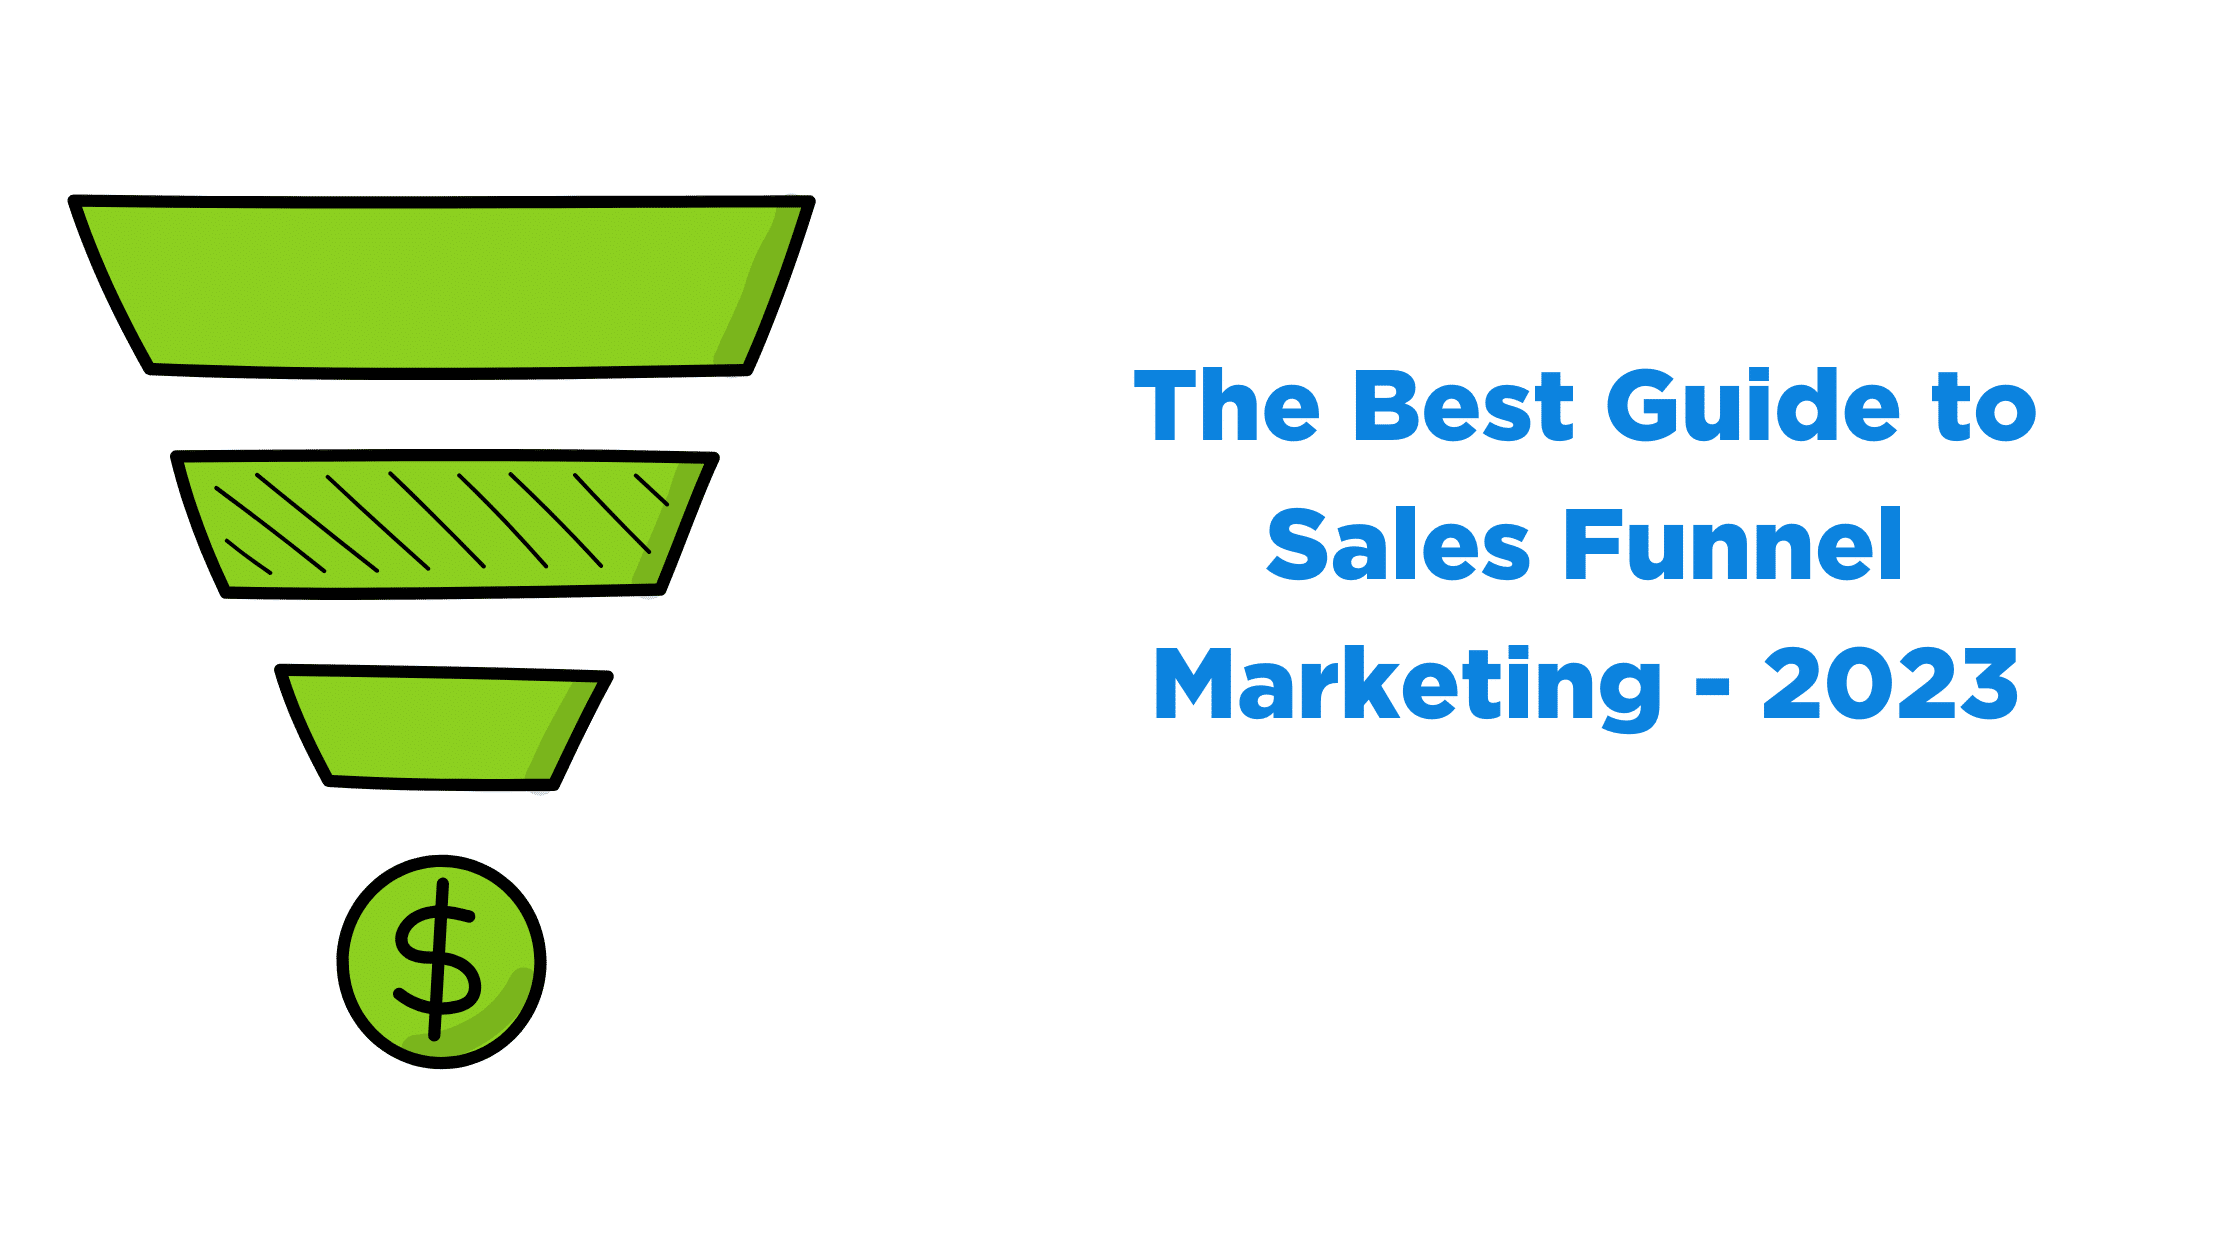 The Best Guide to Sales Funnel Marketing - 2023